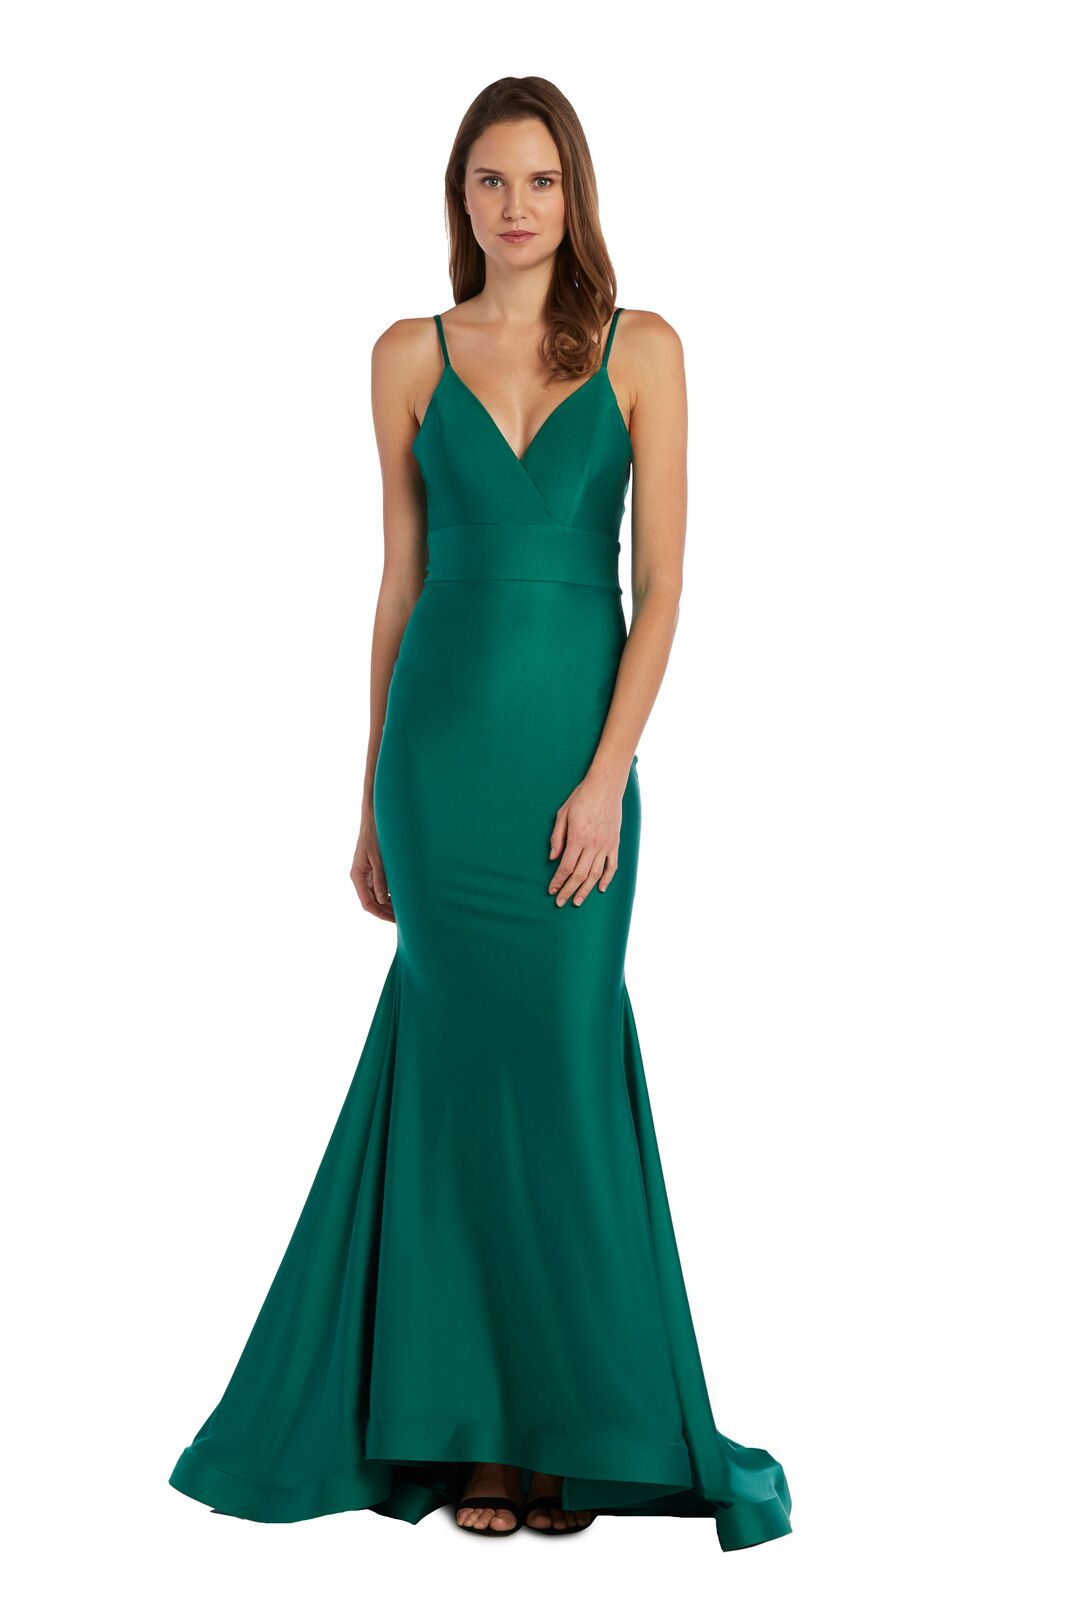 Gown with Spaghetti Straps